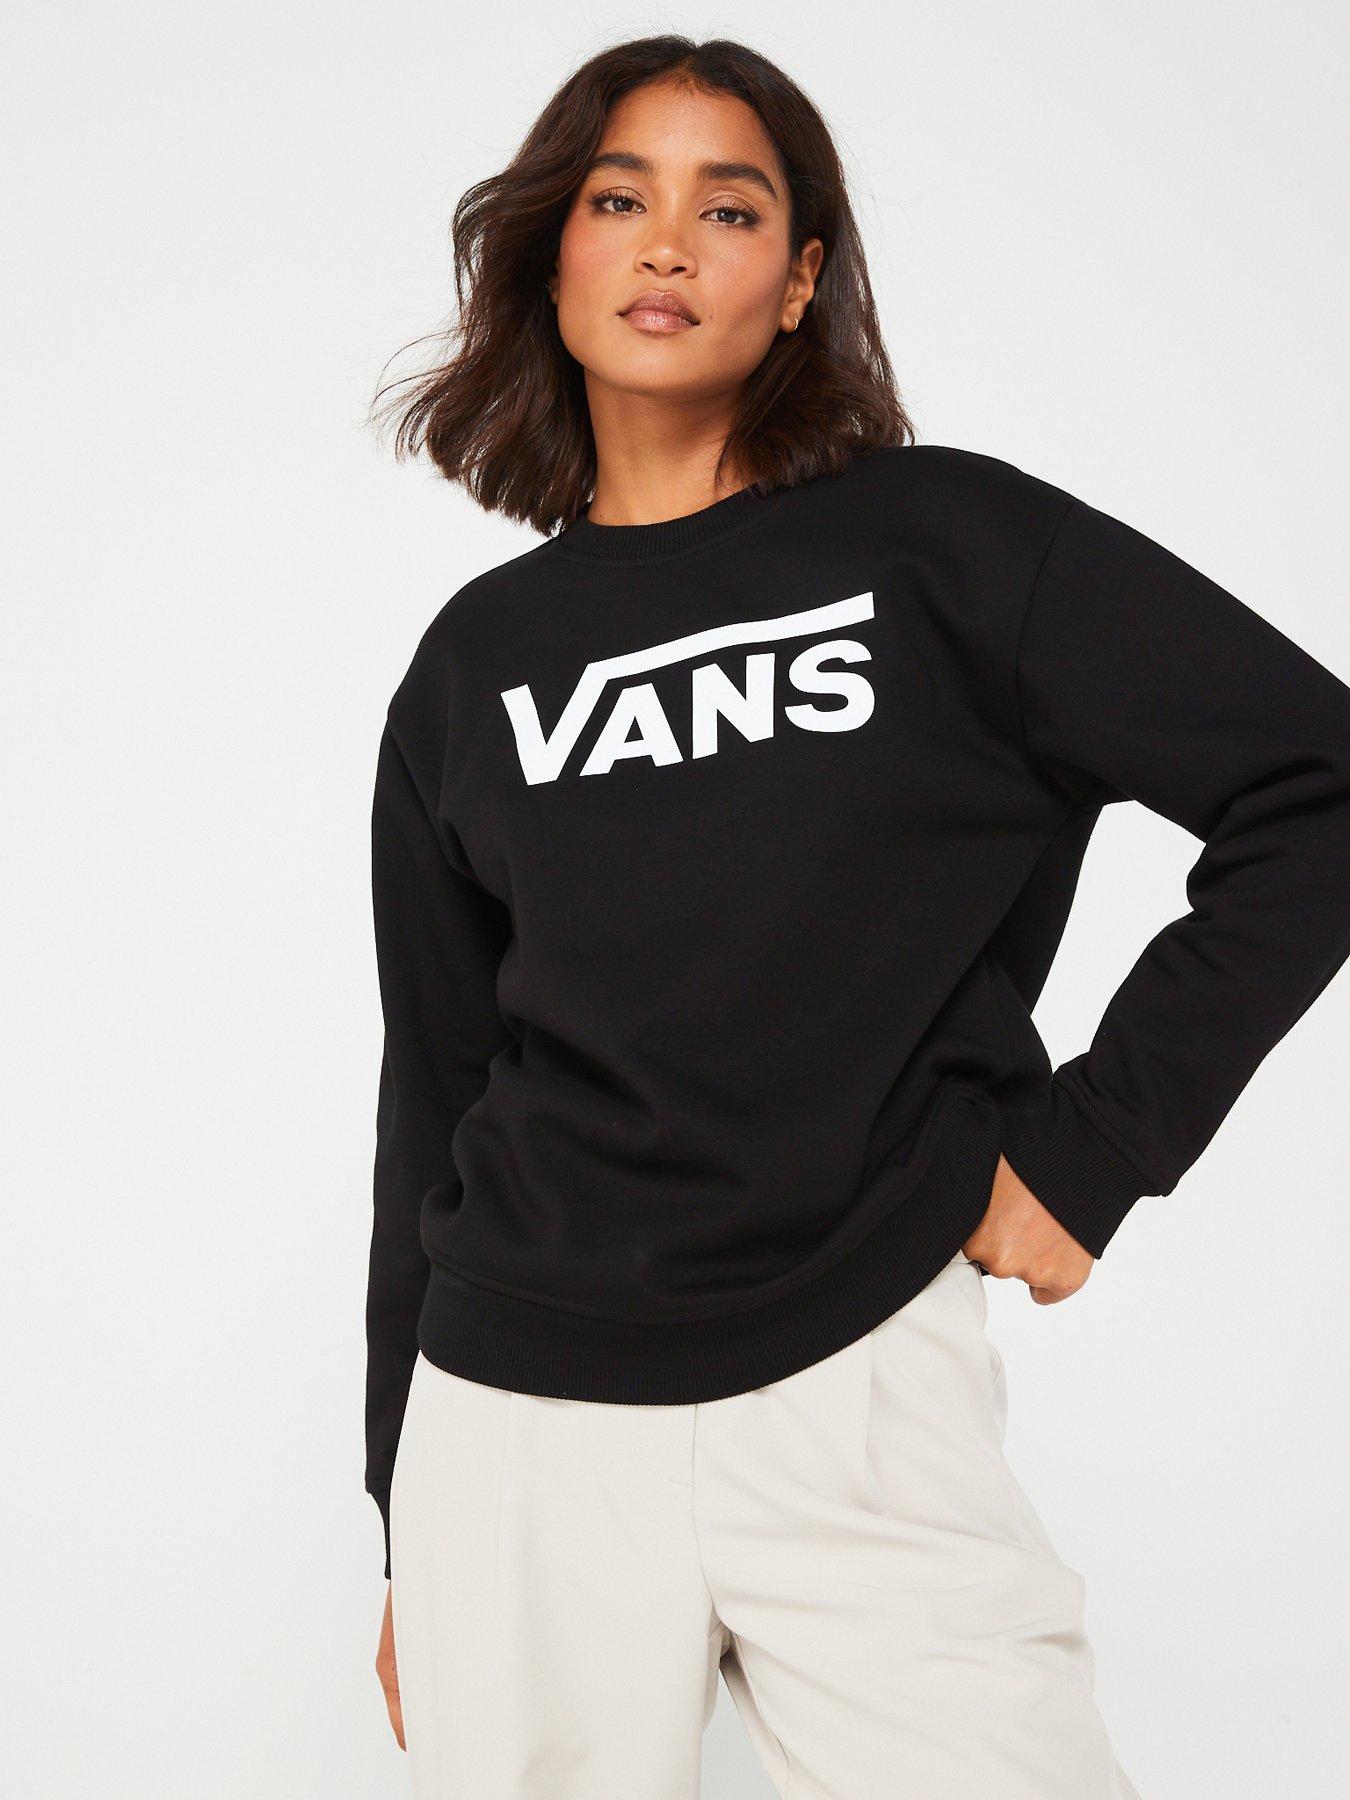 Vans, Womens sports clothing, Sports & leisure